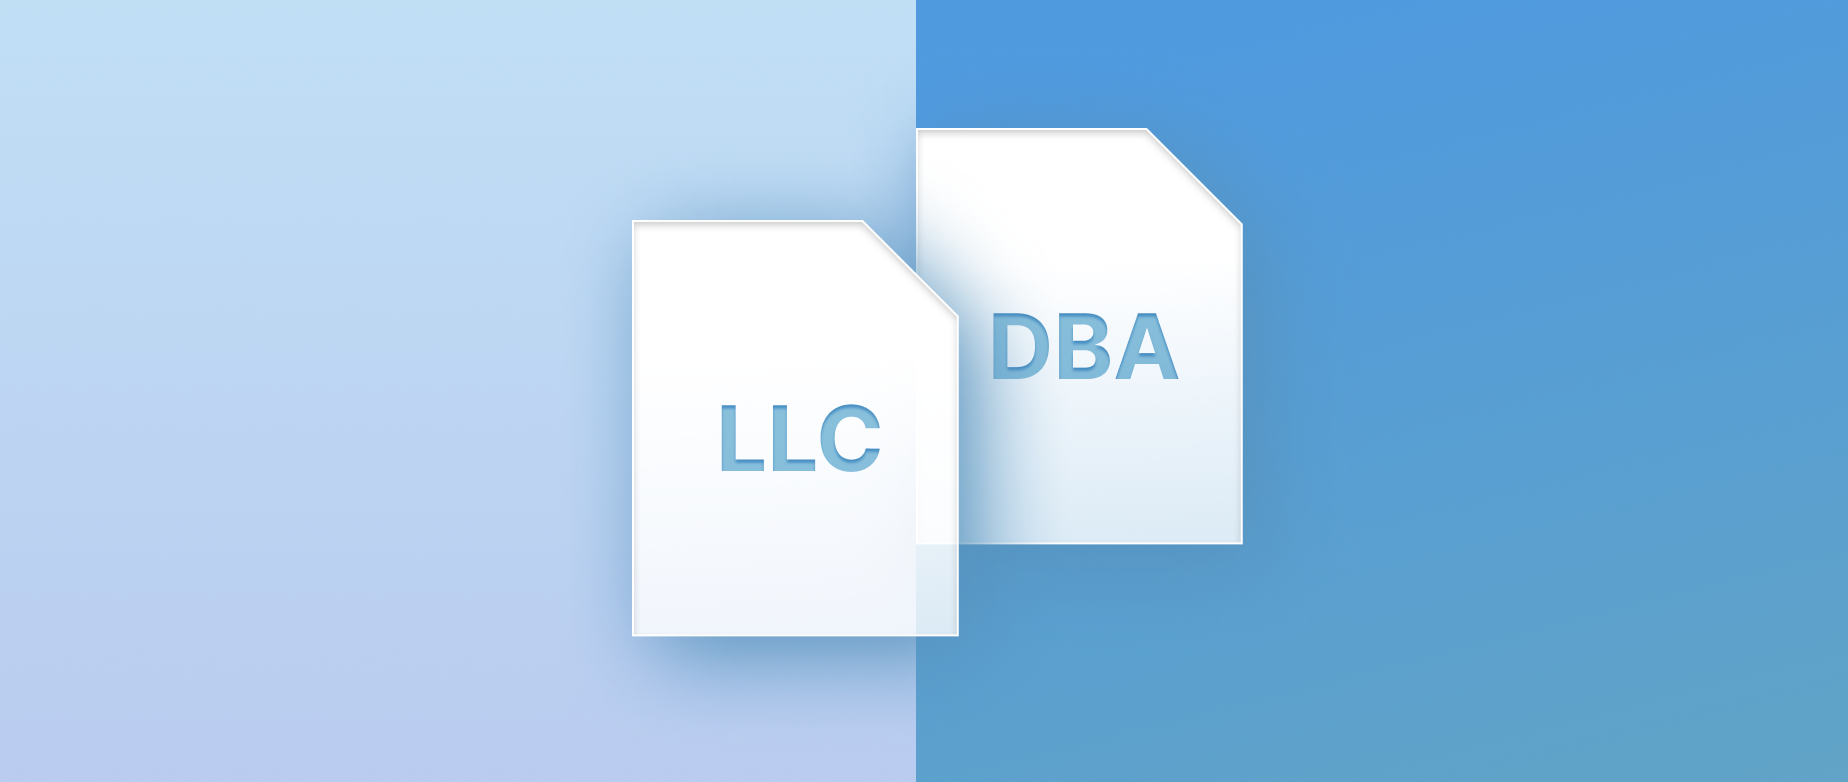 Split blue background with LLC and DBA on white paper icons.